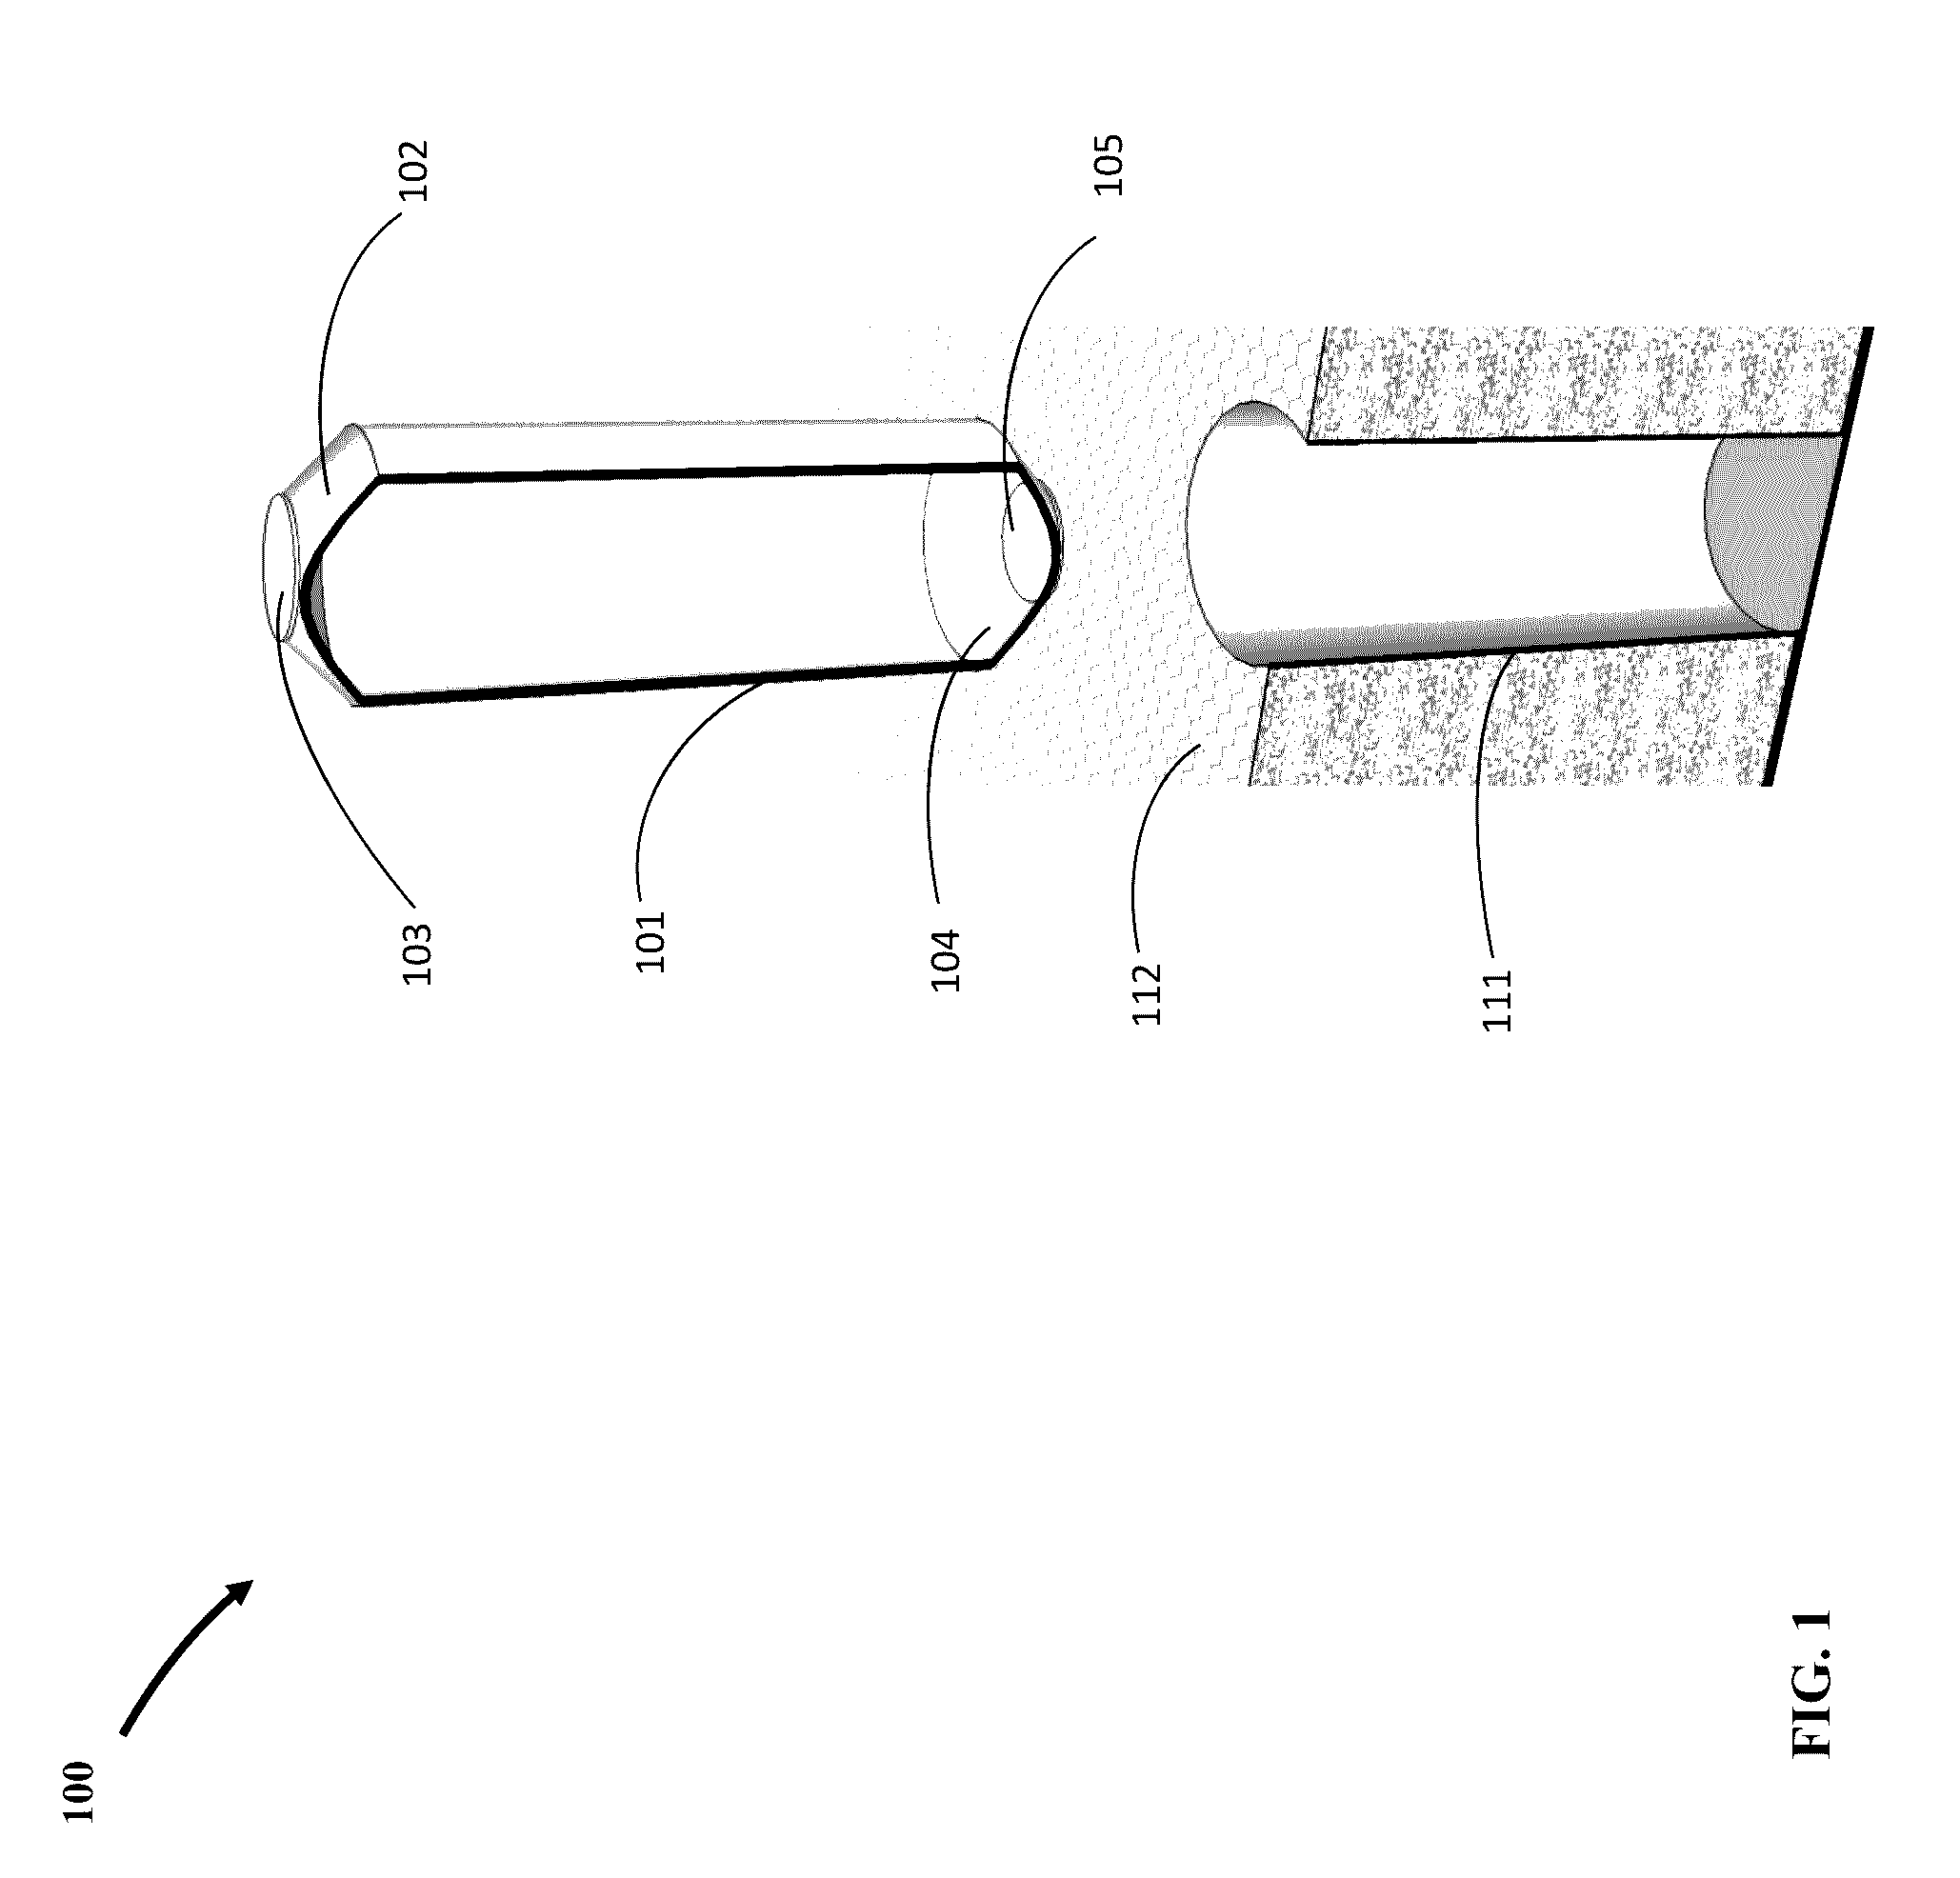 Vertical Underground Storage Tank and Method of Installing and Forming the Same